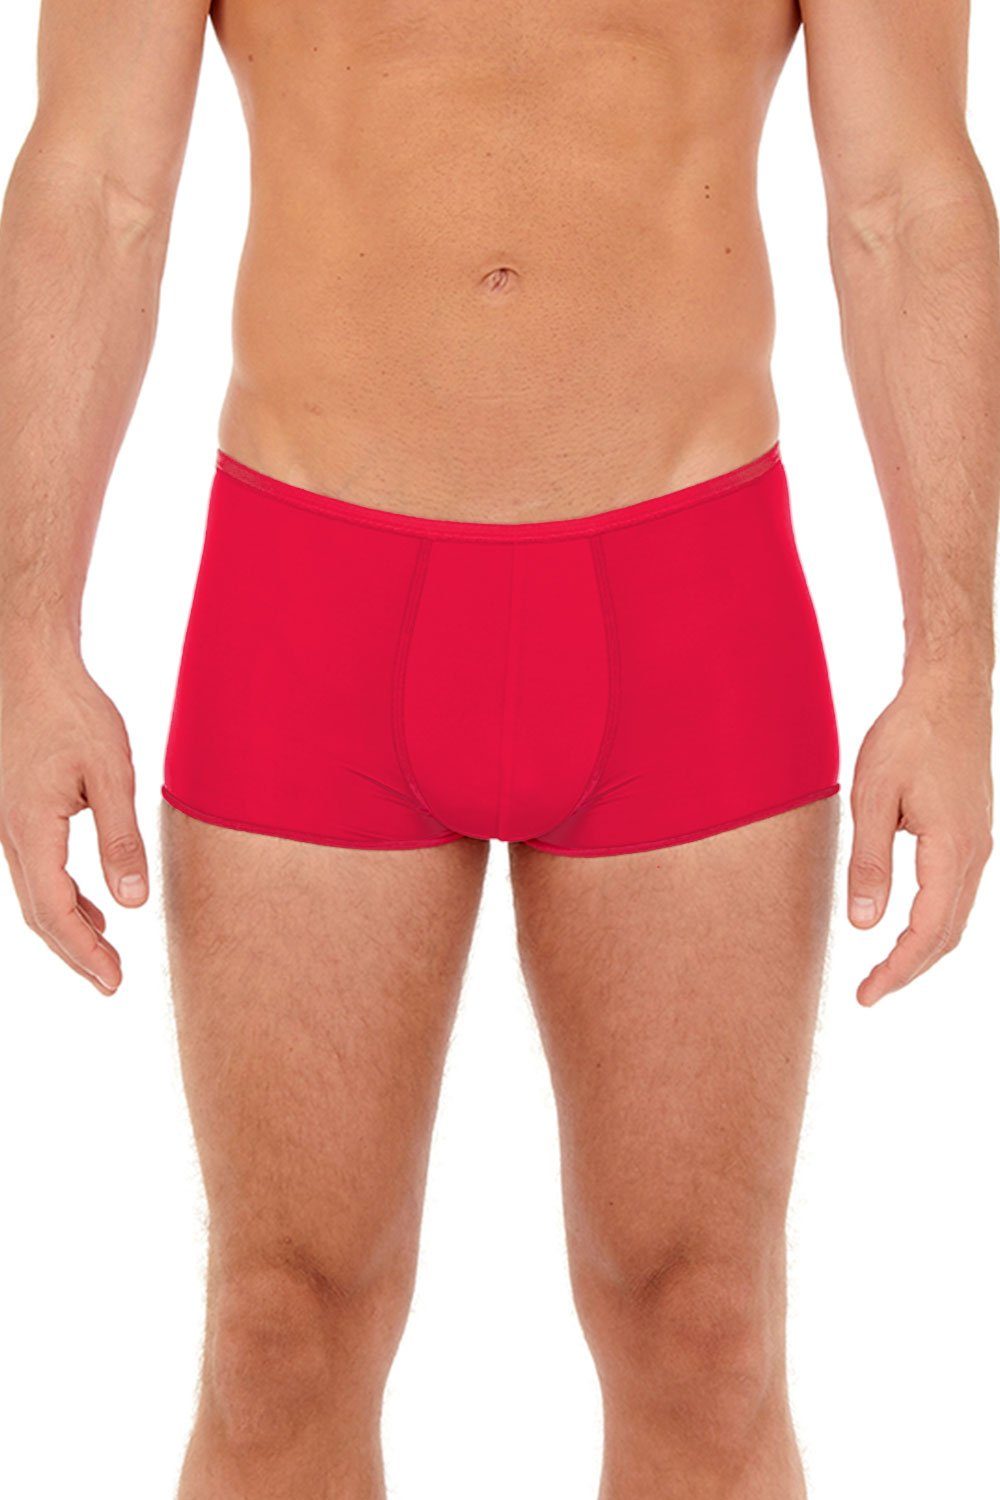 Hom Hipster Trunk 404755 red